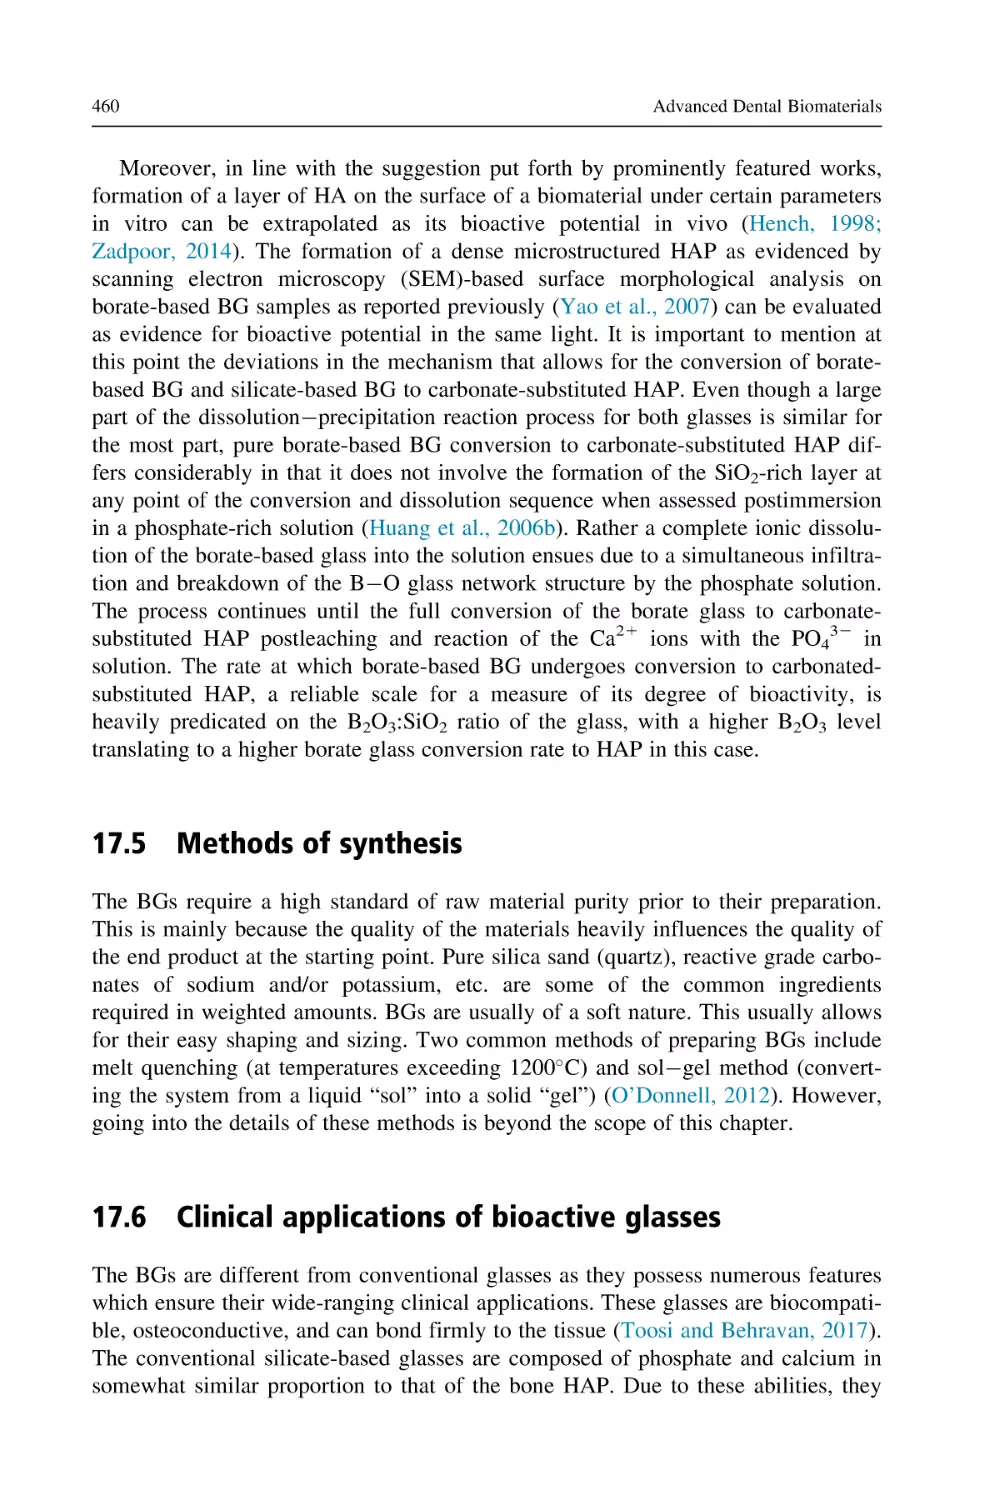 17.5 Methods of synthesis
17.6 Clinical applications of bioactive glasses